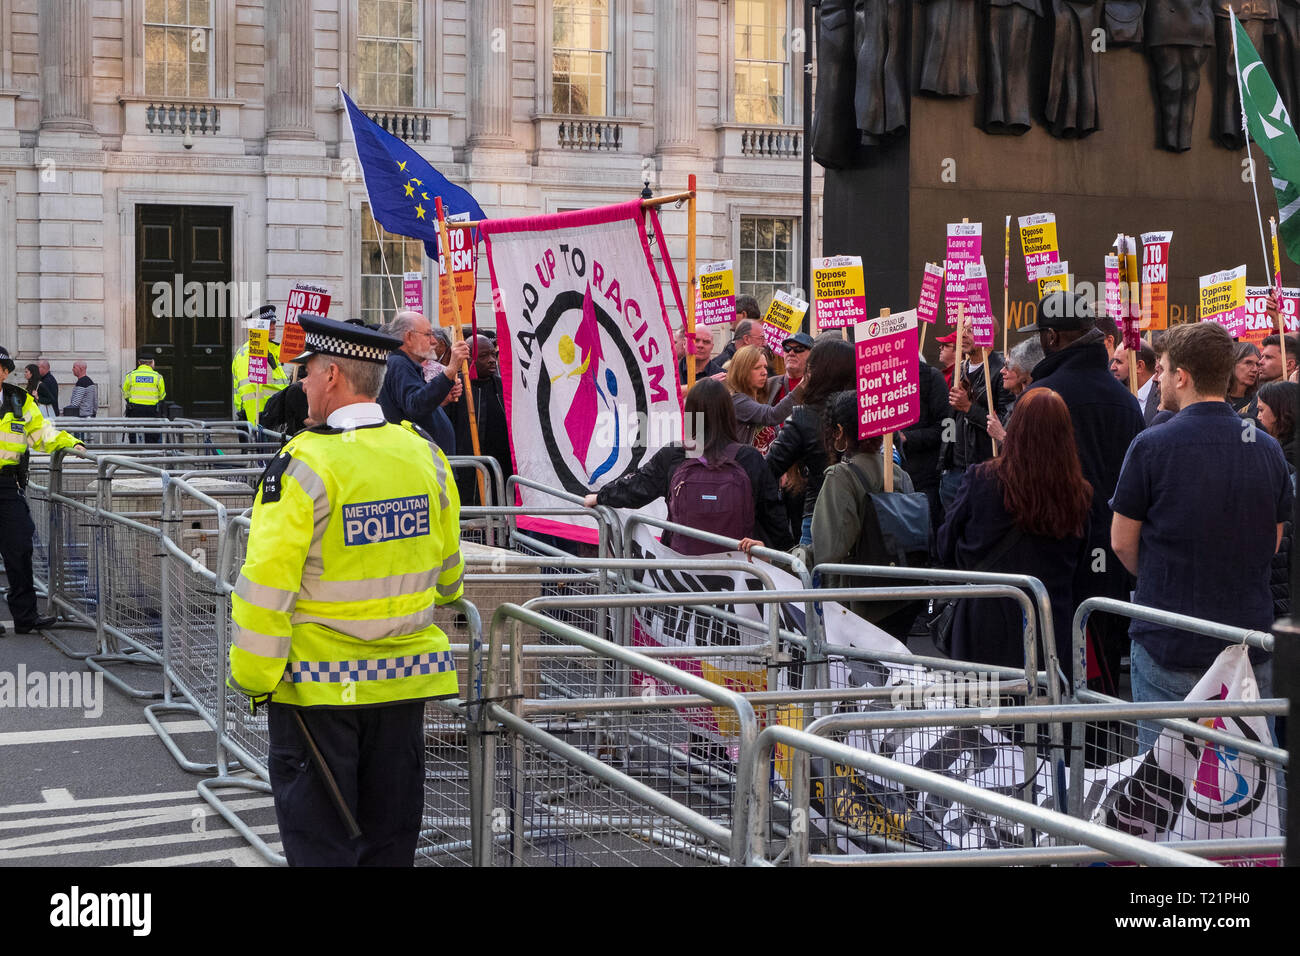 London, UK. 29th Mar, 2019. the day the UK was due to leave the EU. Near Downing Street on Whitehall a secure police cordon pens in demonstrators from the Stand Up to Racism group involved in a counter-demonstration to the pro-Brexit groups in Parliament Square. Credit: Scott Hortop/Alamy Live News. Stock Photo